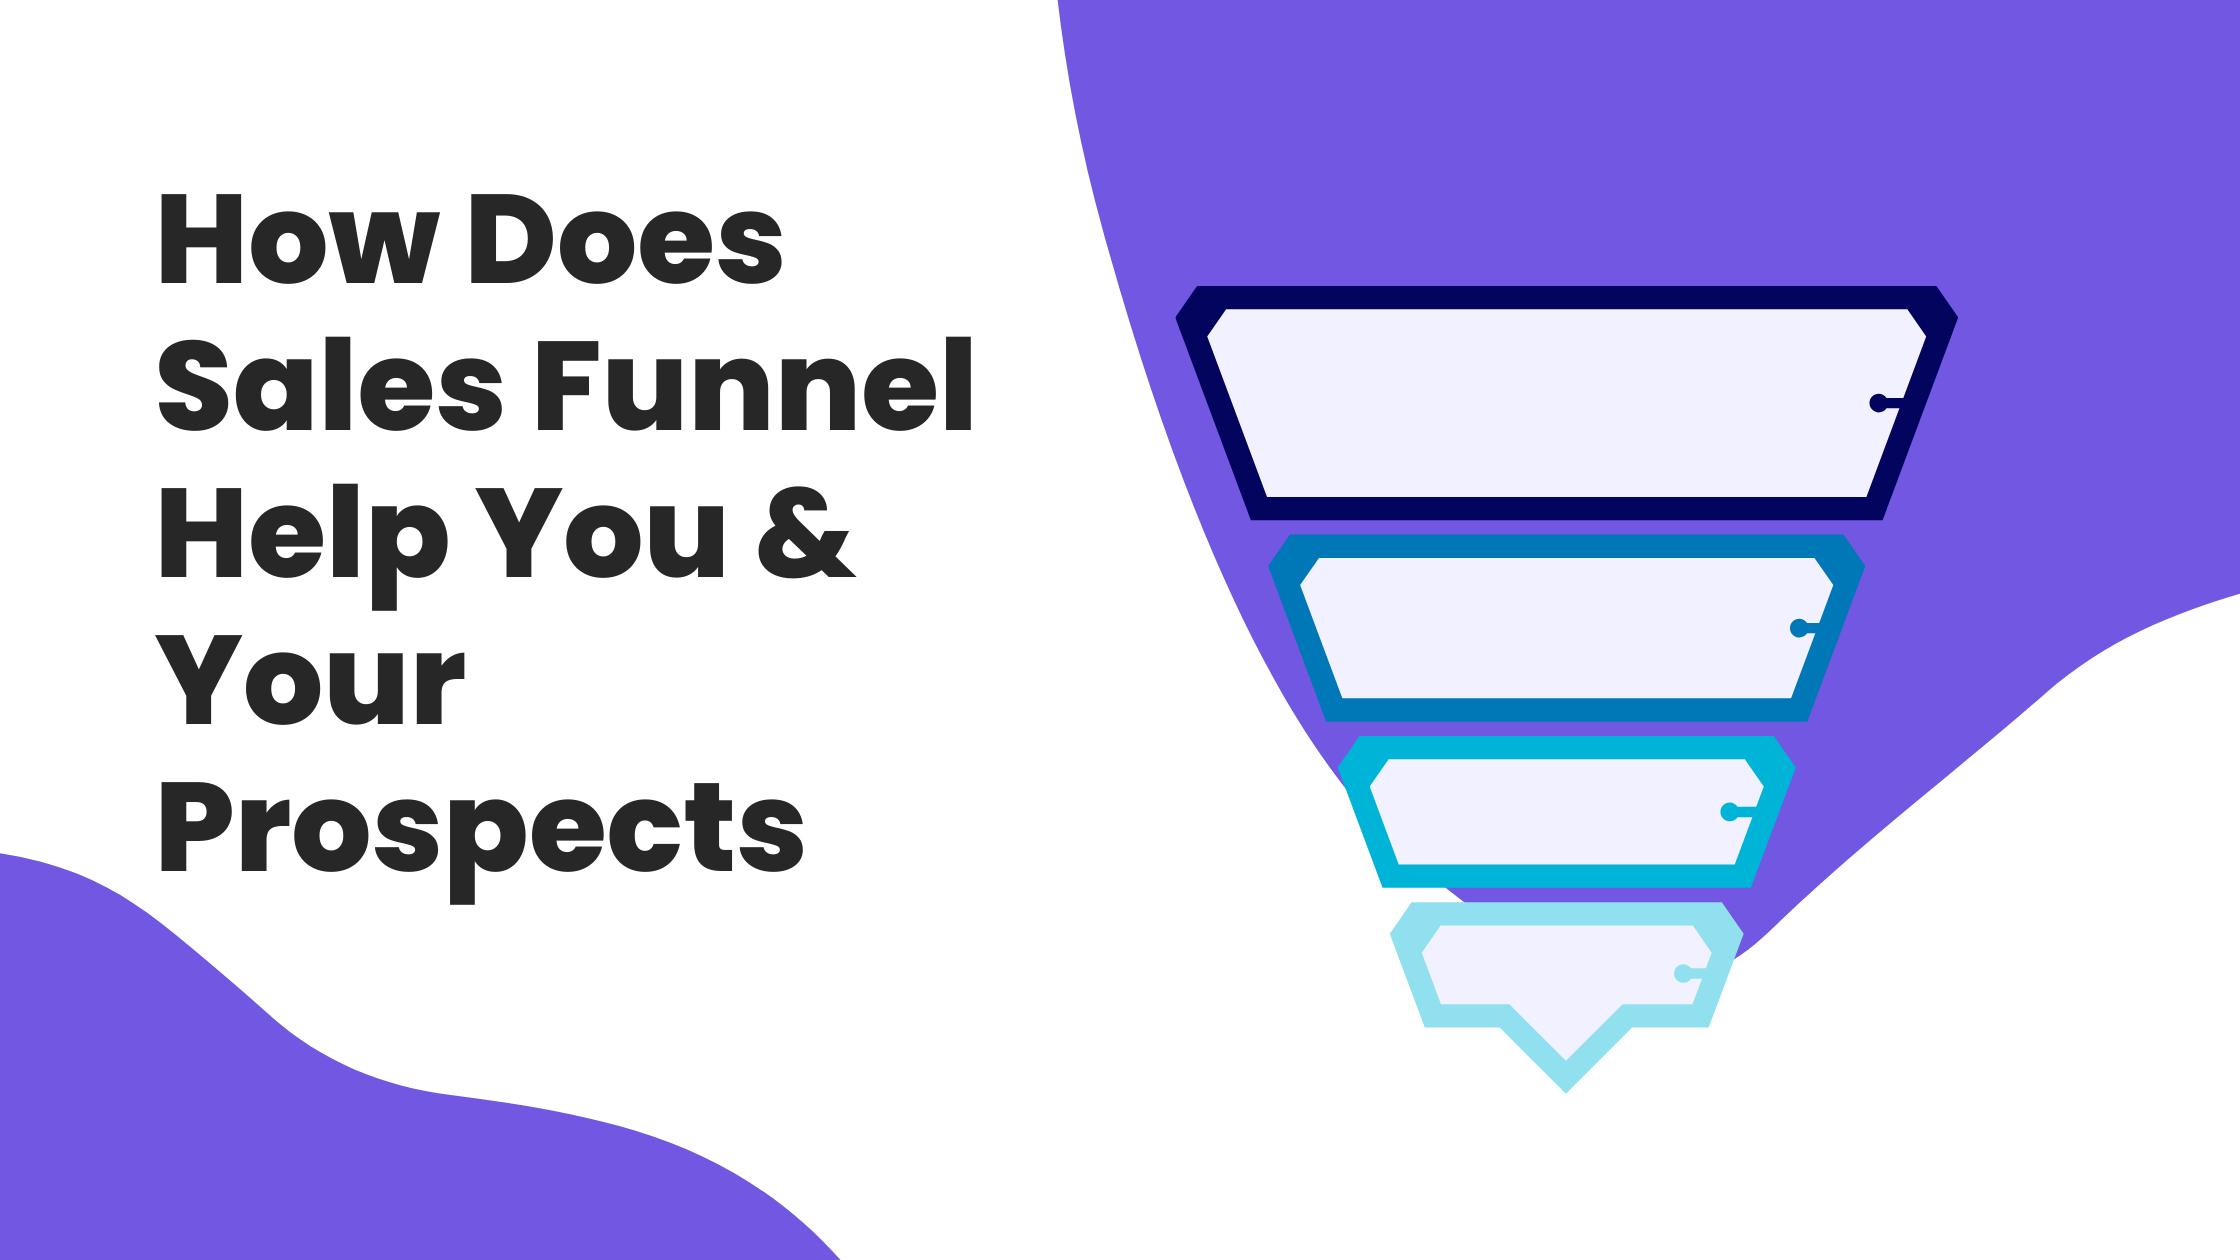 How Does Sales Funnel Help You & Your Prospects